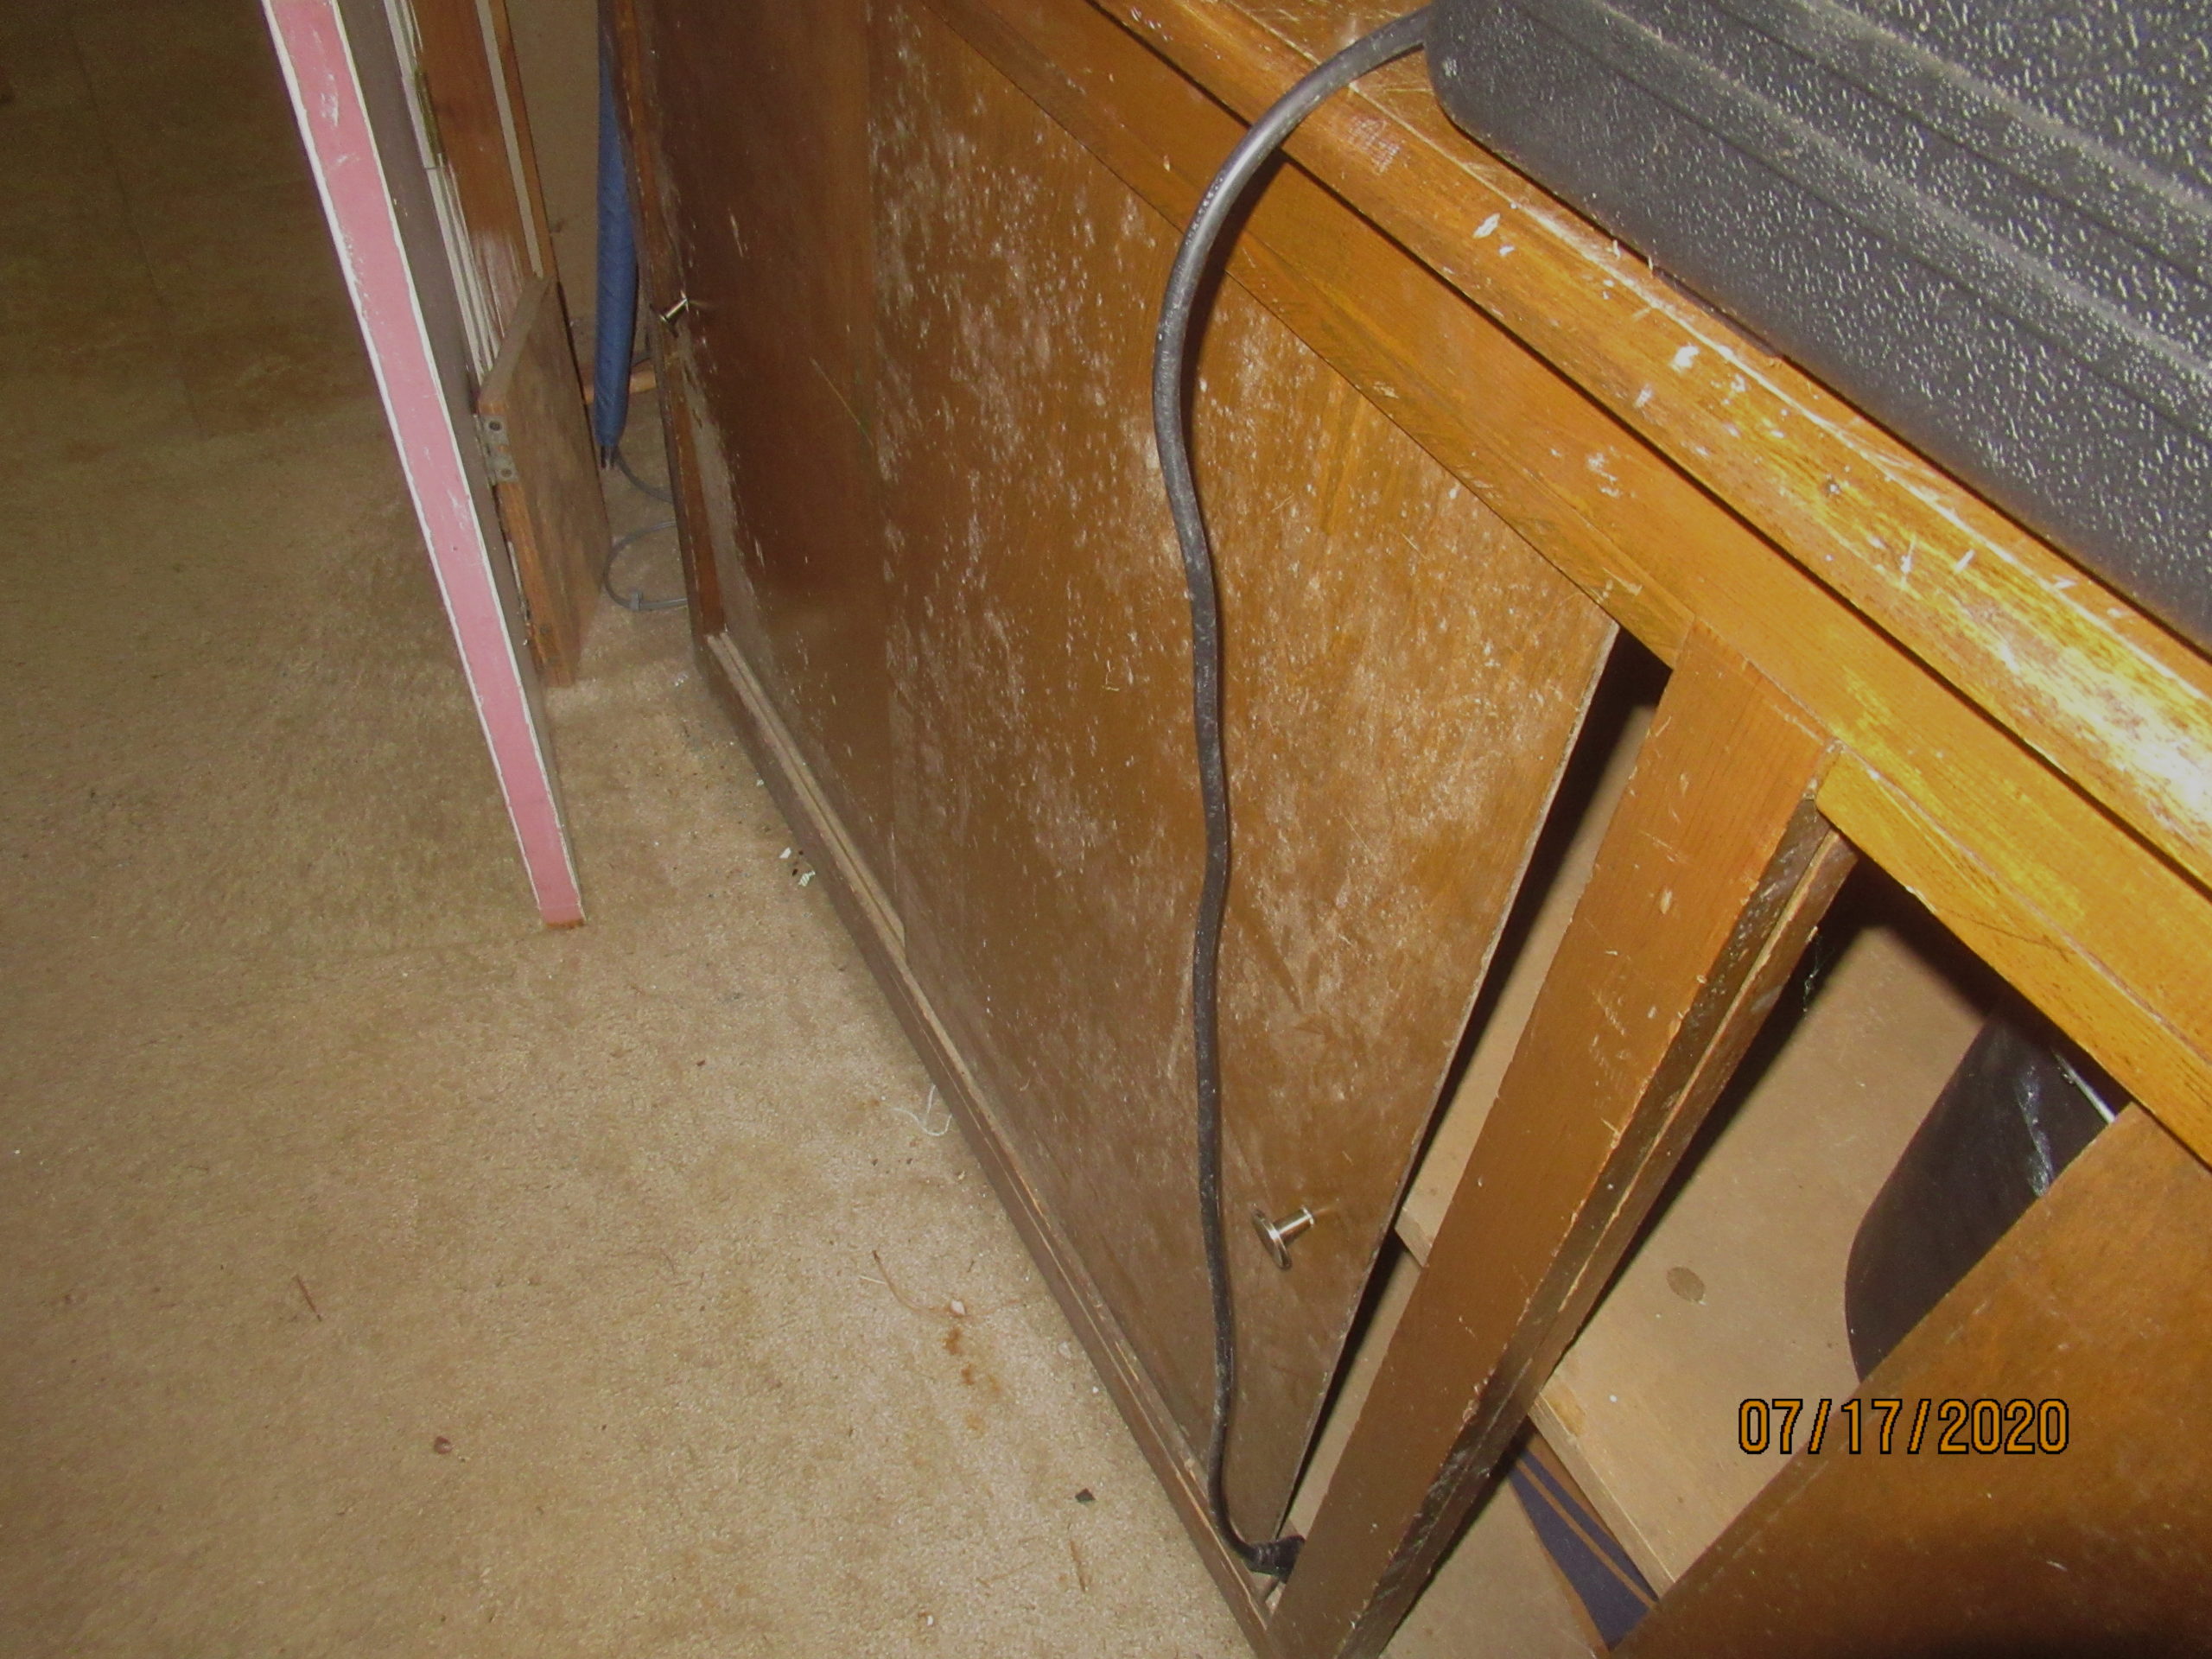 Mold growth on basement furniture